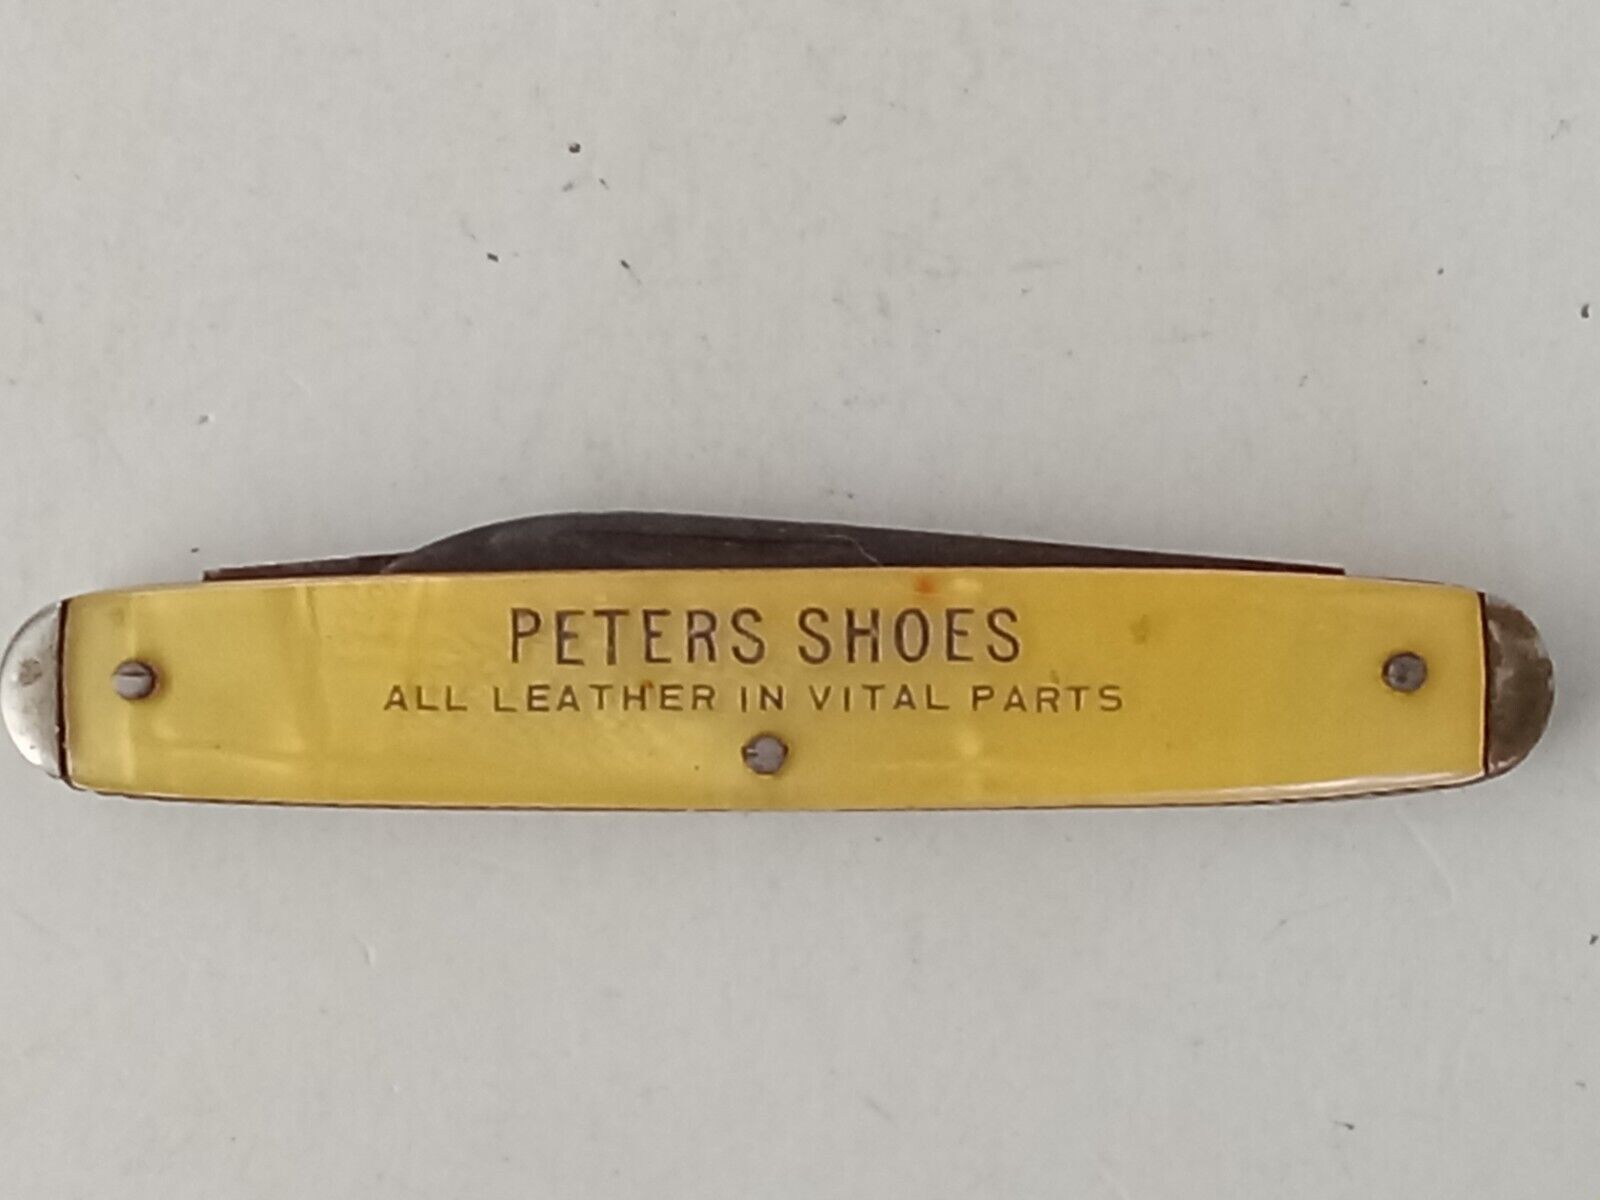 Clover Brand Syracuse NY USA Pocket Knife Advertising Peters Shoes 